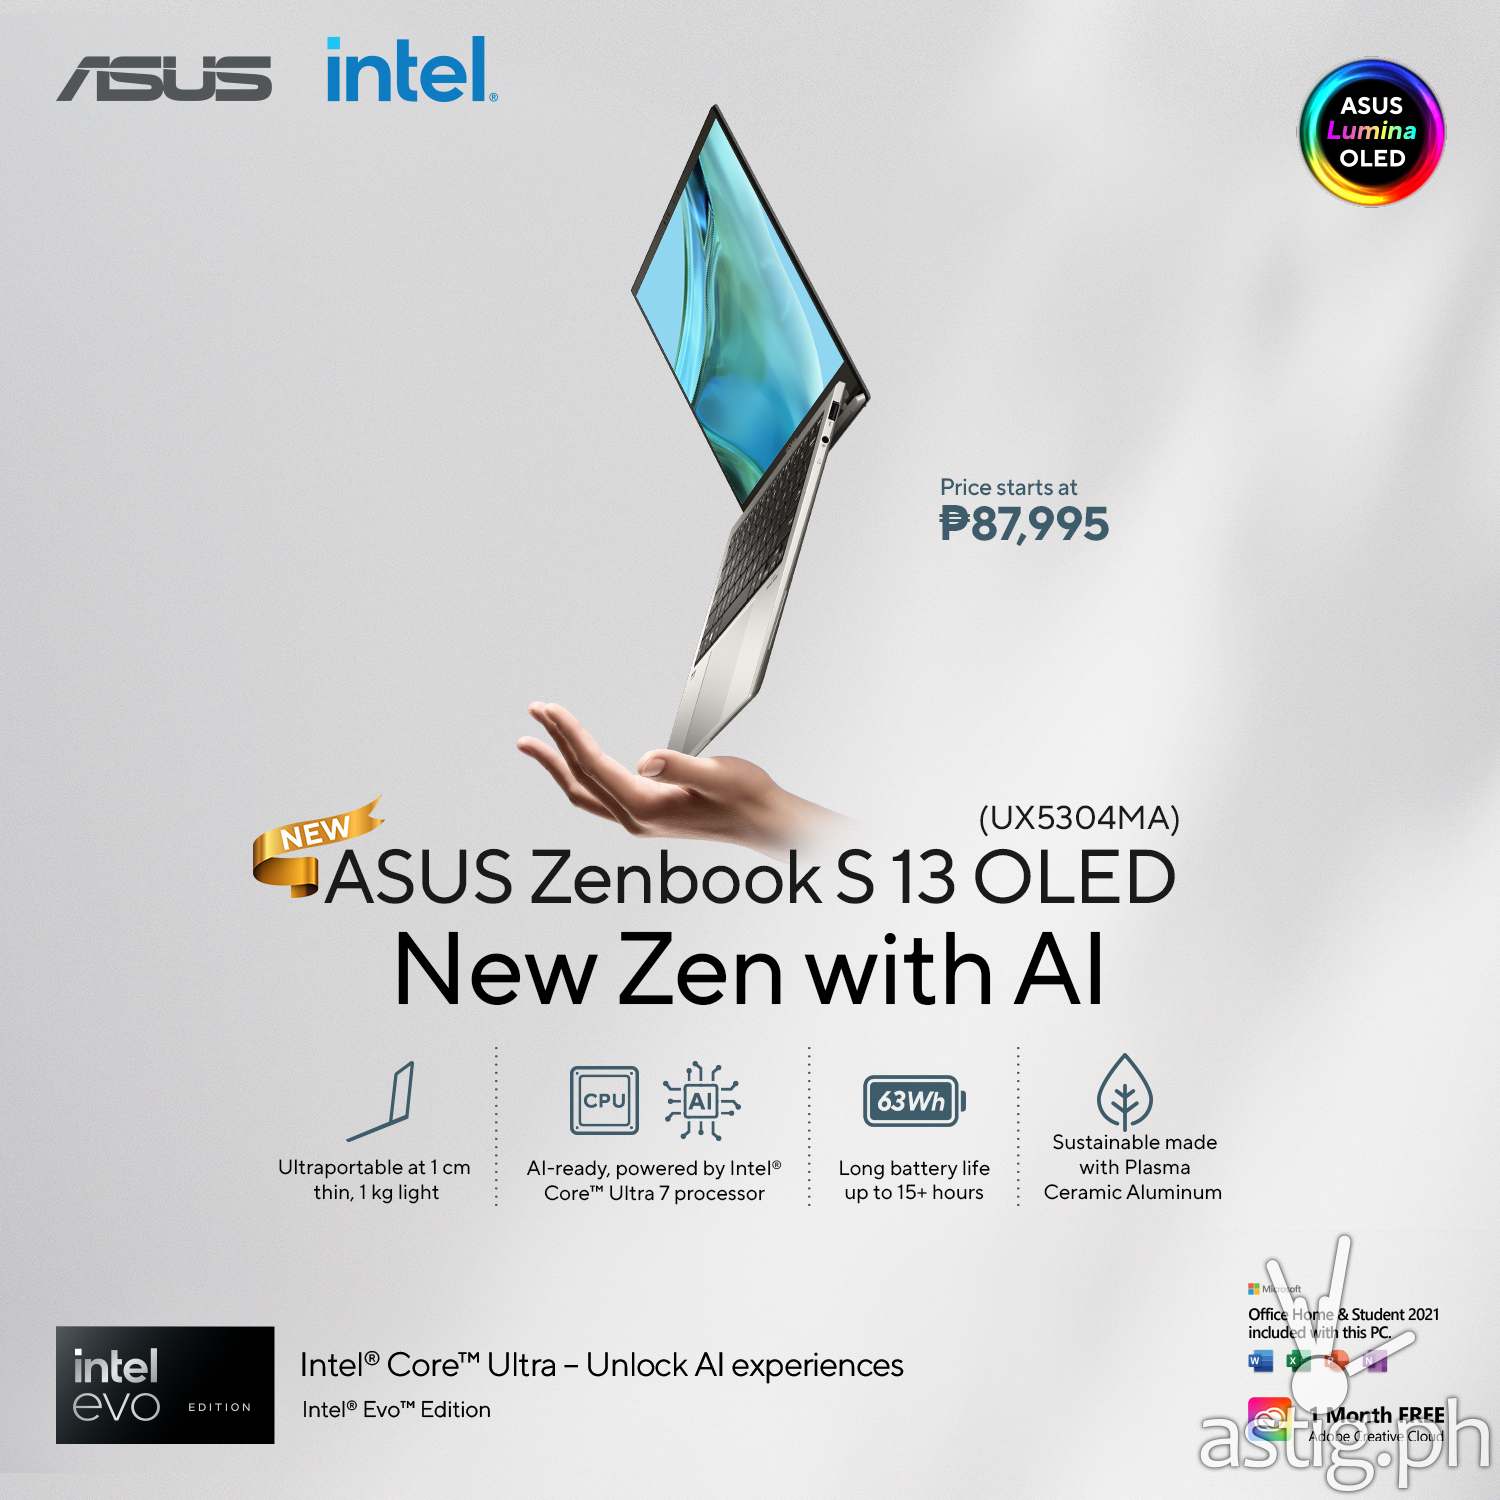 ASUS Philippines Announces New Zenbook S 13 OLED with Intel Core Ultra 7